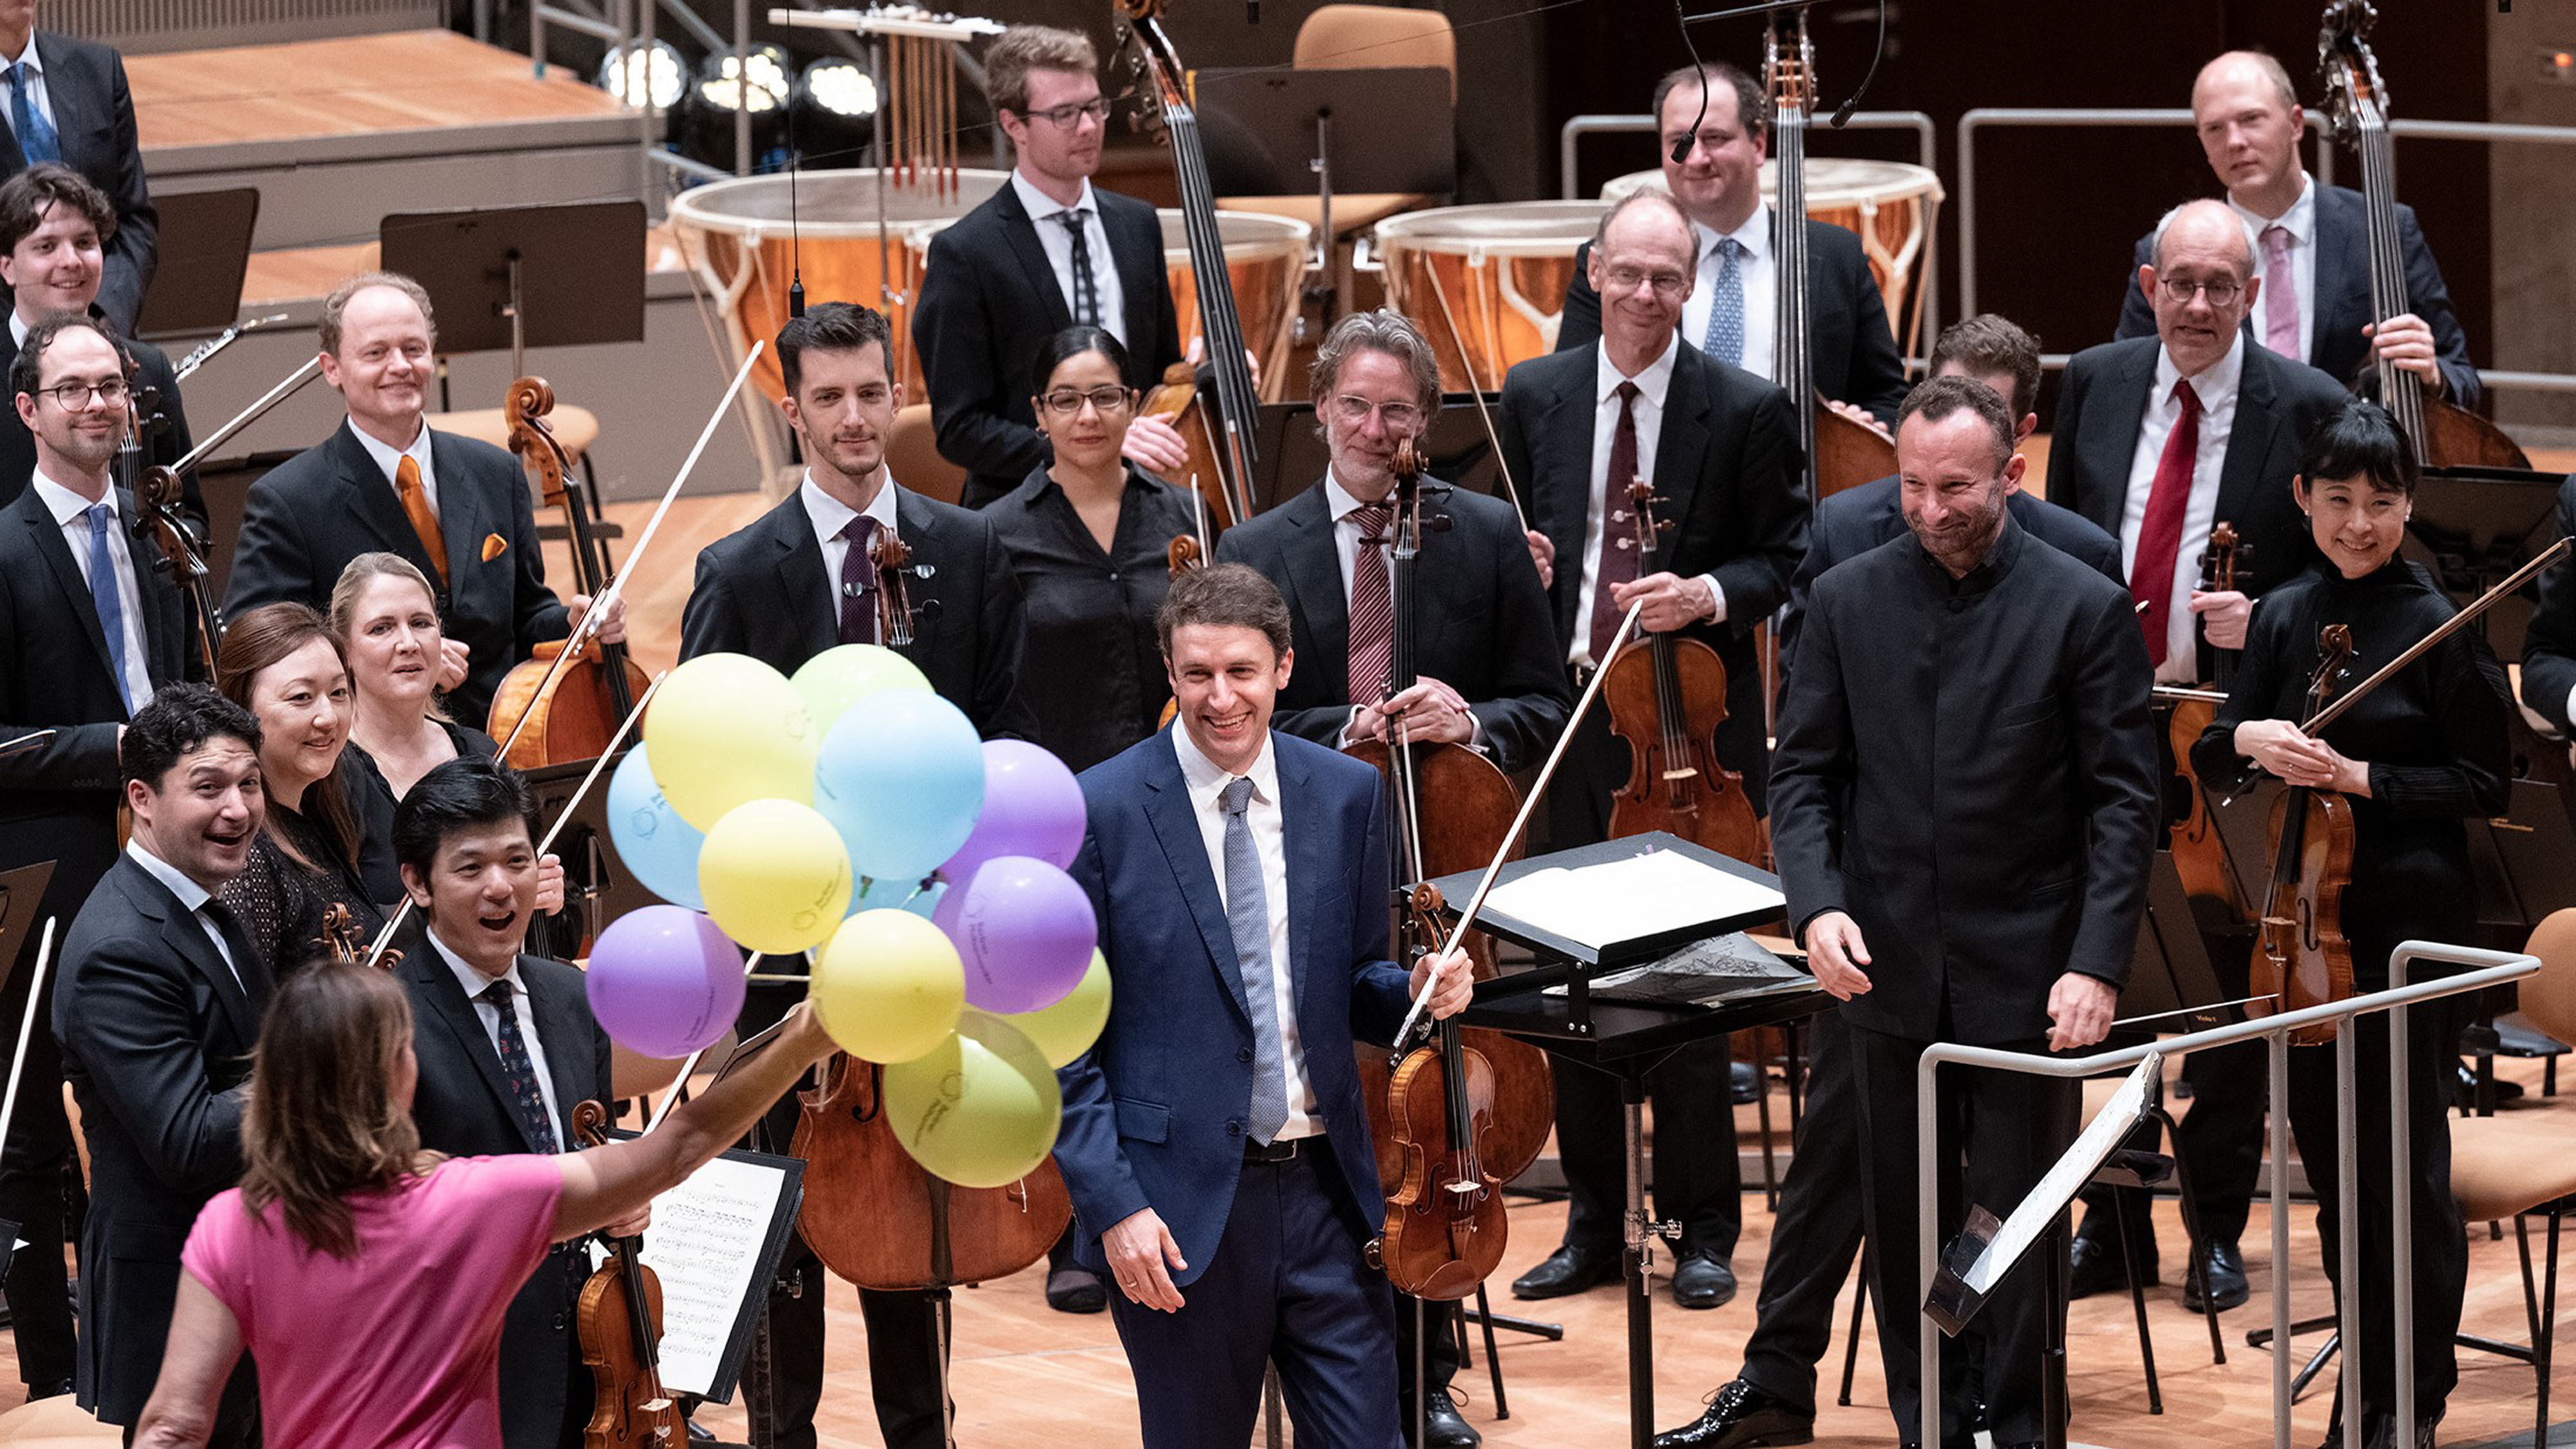 Woman with lots of colourful balloons joins the musicians on stage